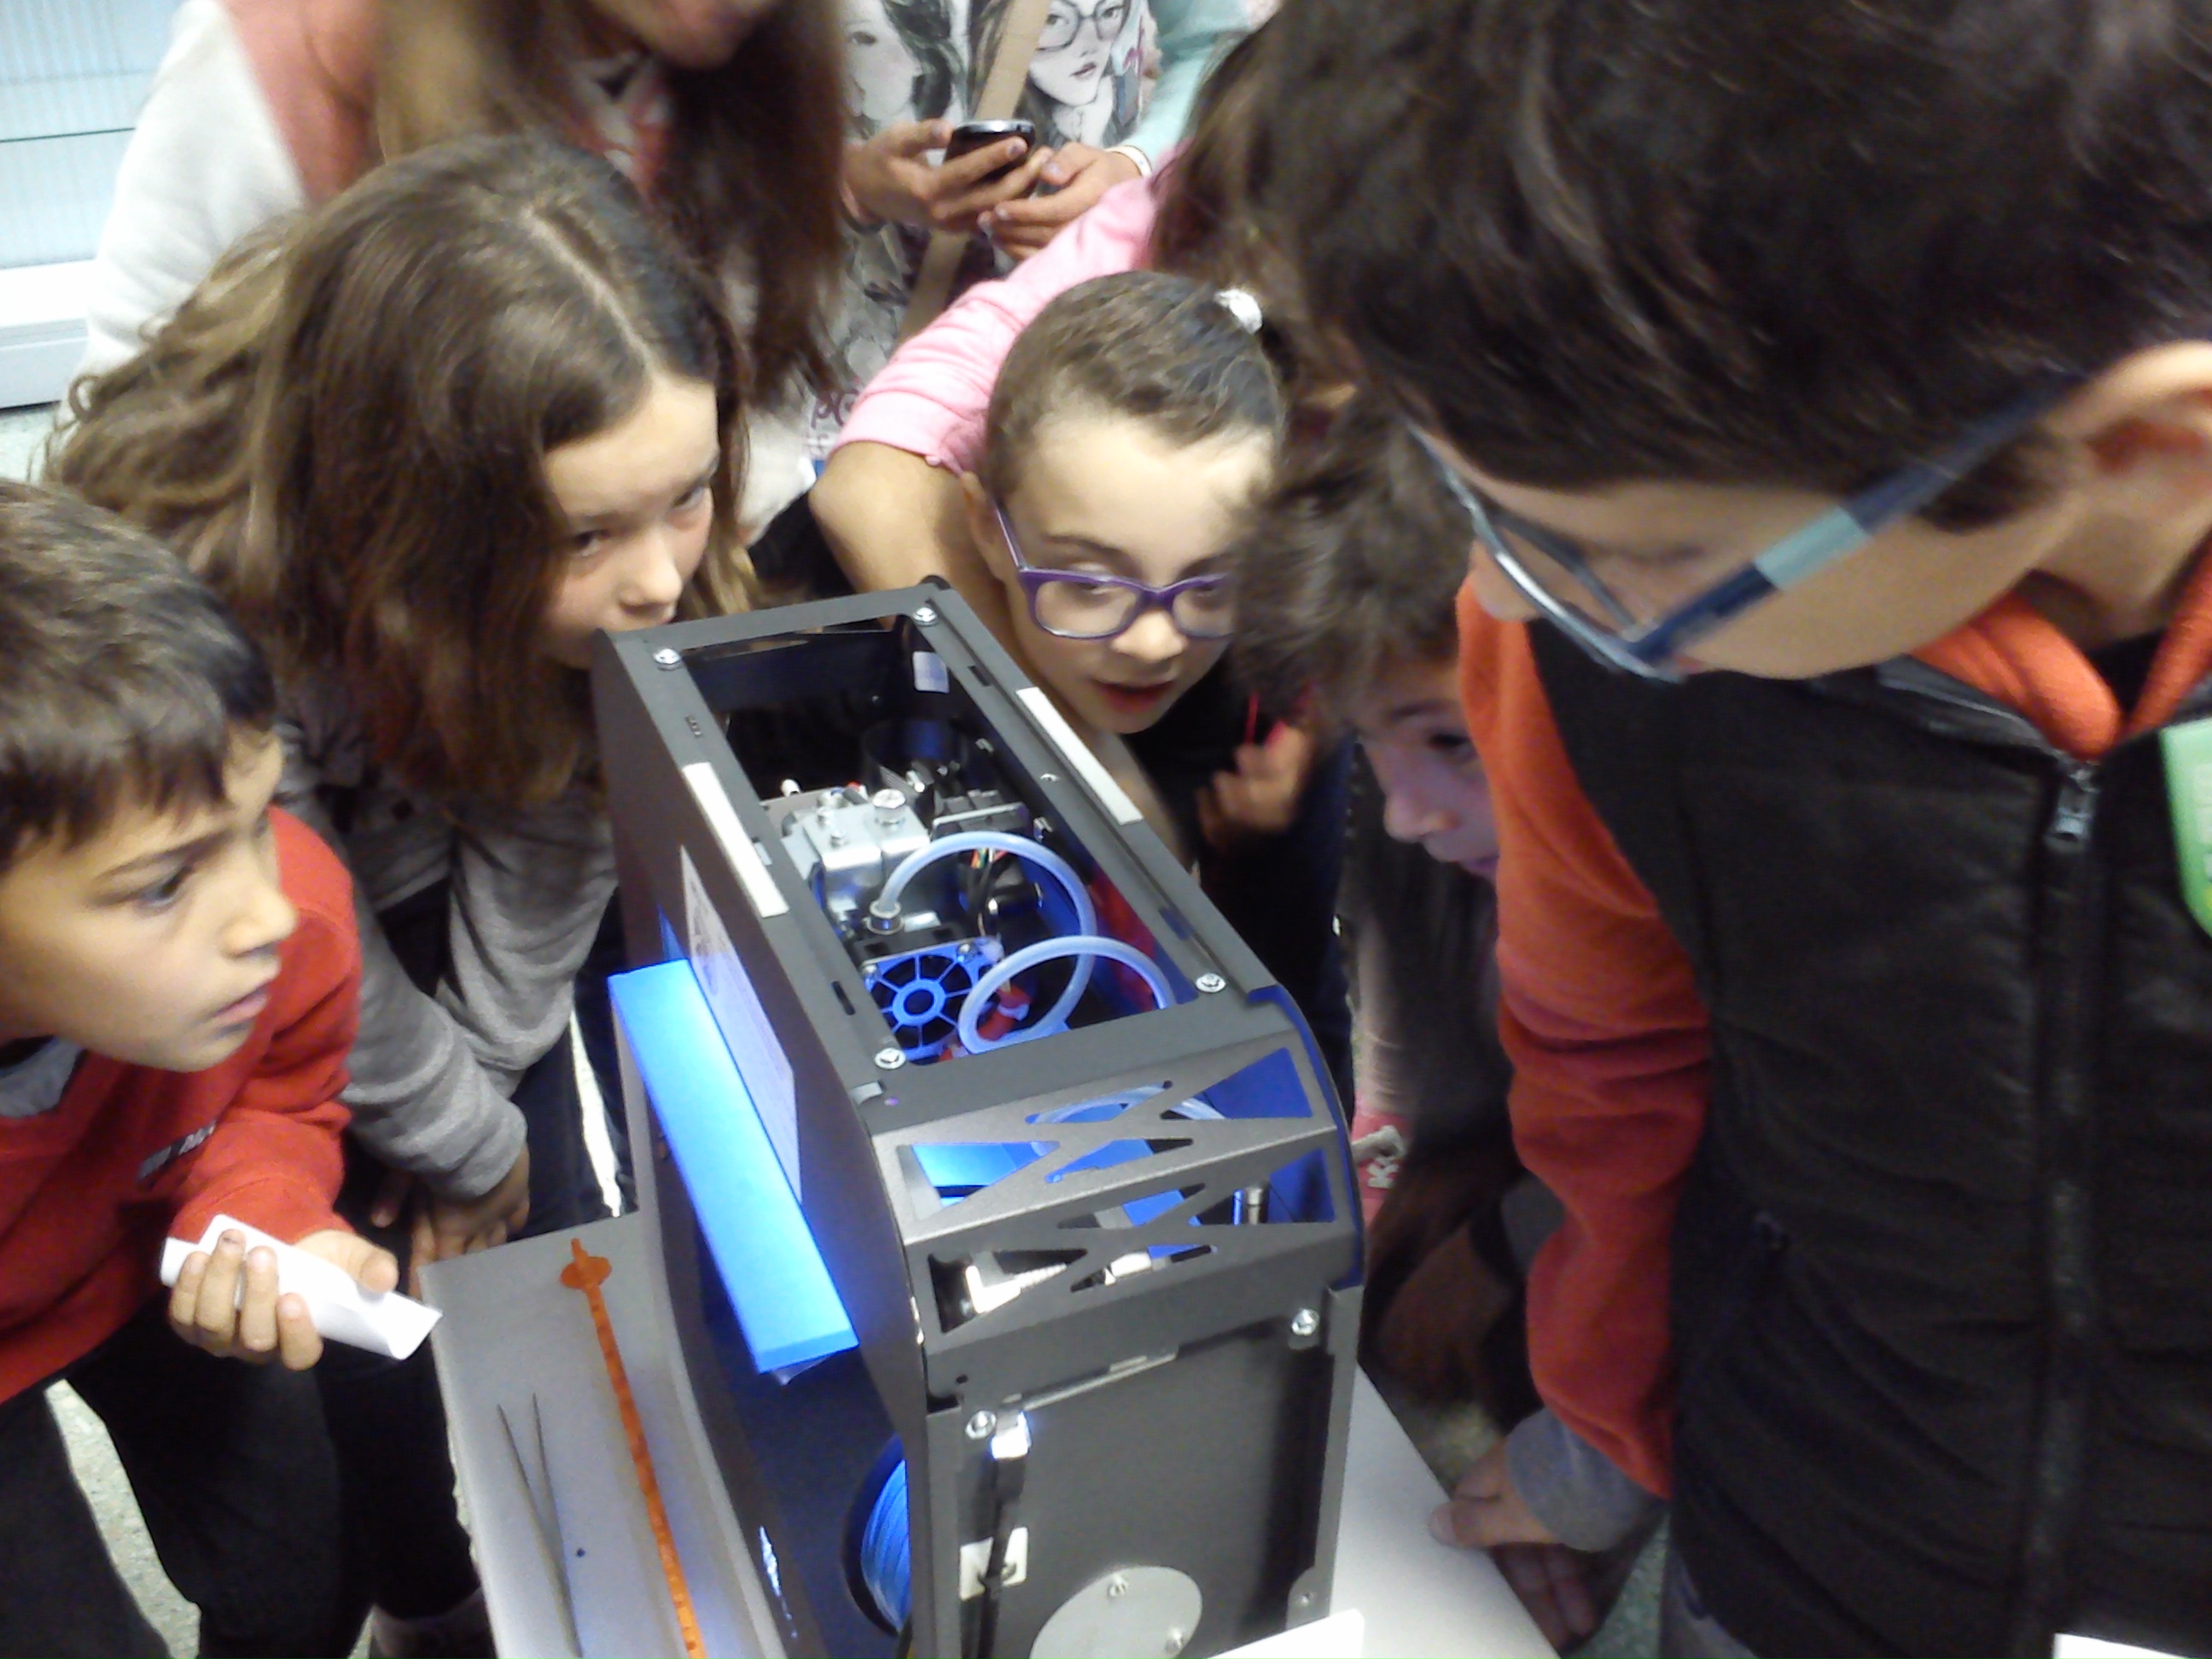 3D printing: A New Frontier for Education